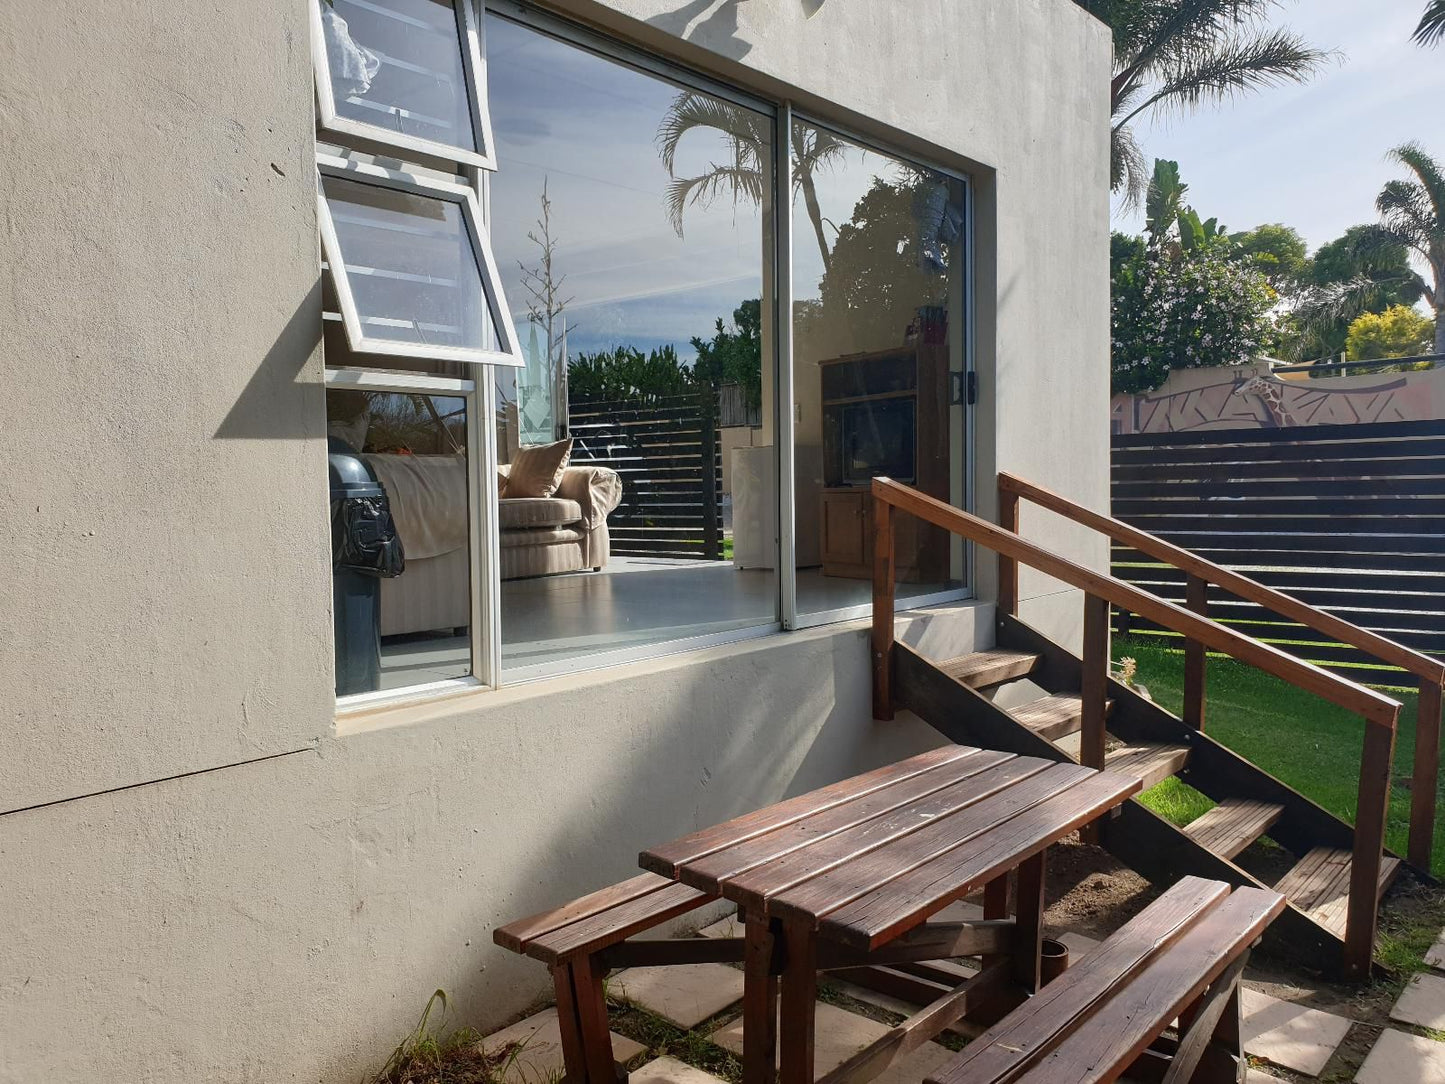 Amakaya Backpackers Travellers Accommodation Plett Central Plettenberg Bay Western Cape South Africa House, Building, Architecture, Palm Tree, Plant, Nature, Wood